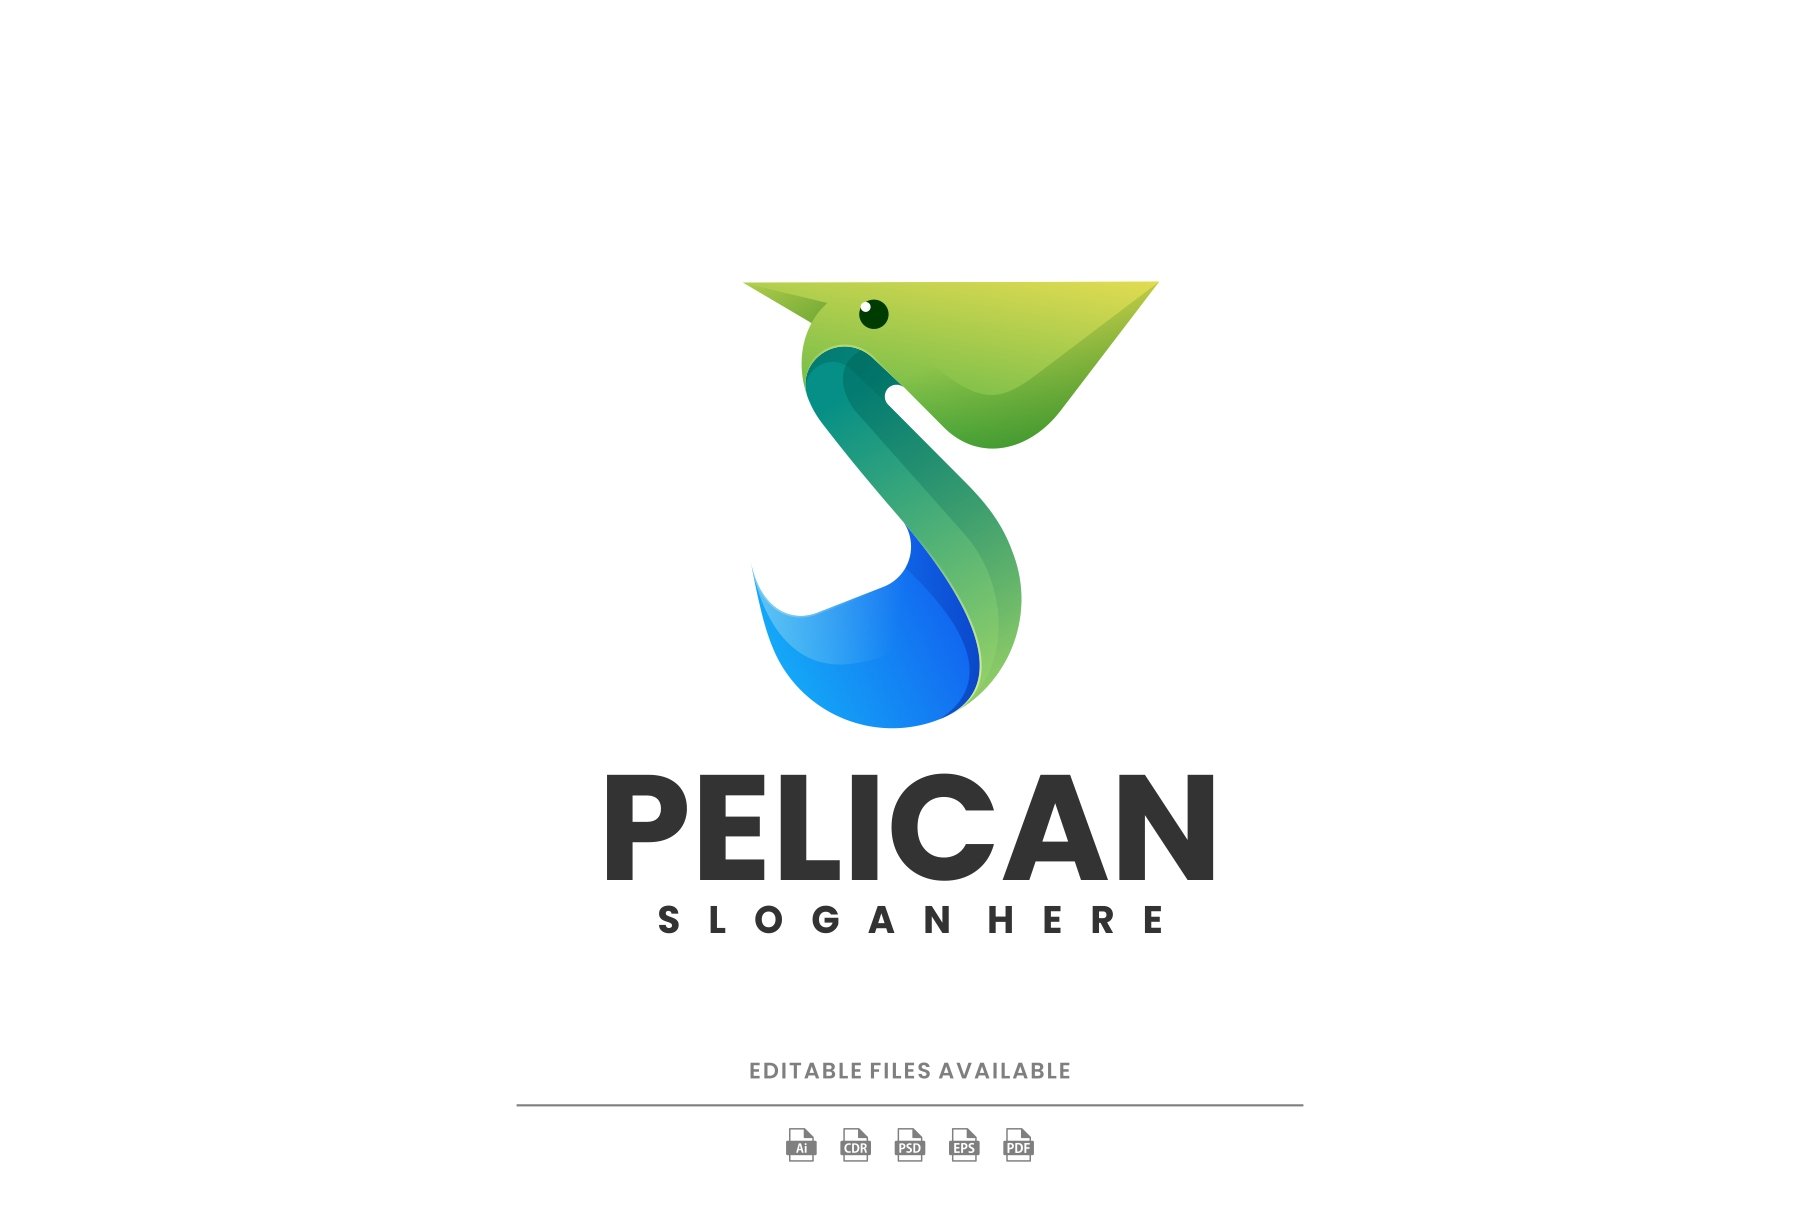 Pelican Colorful Logo cover image.